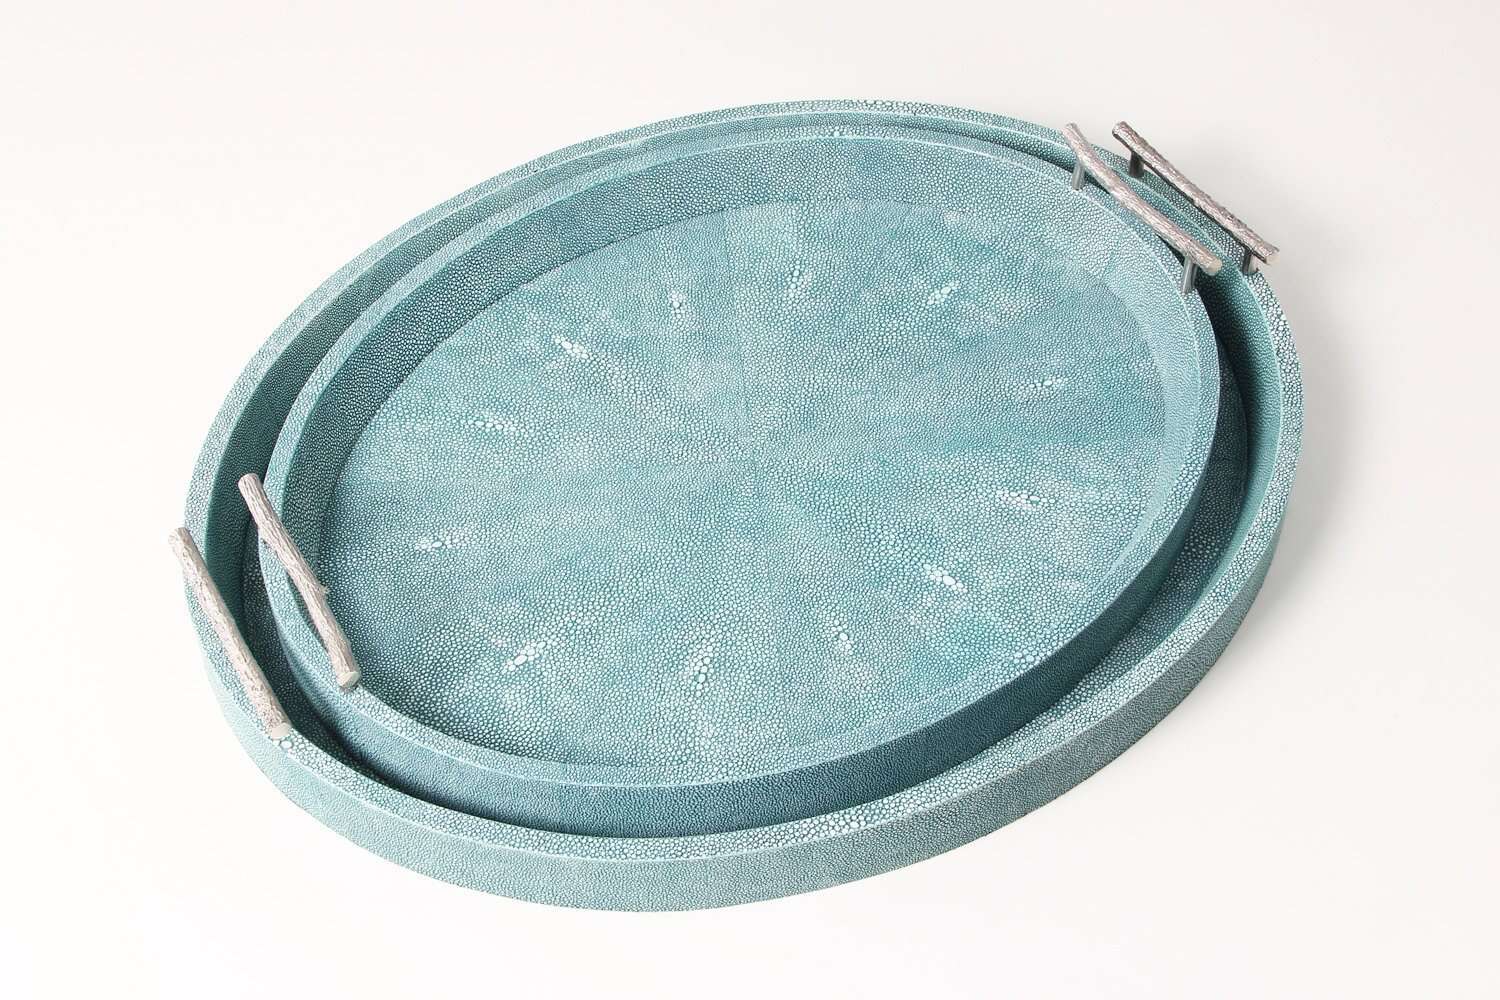 Drinks tray chic Forwood Design teal shagreen drinks tray